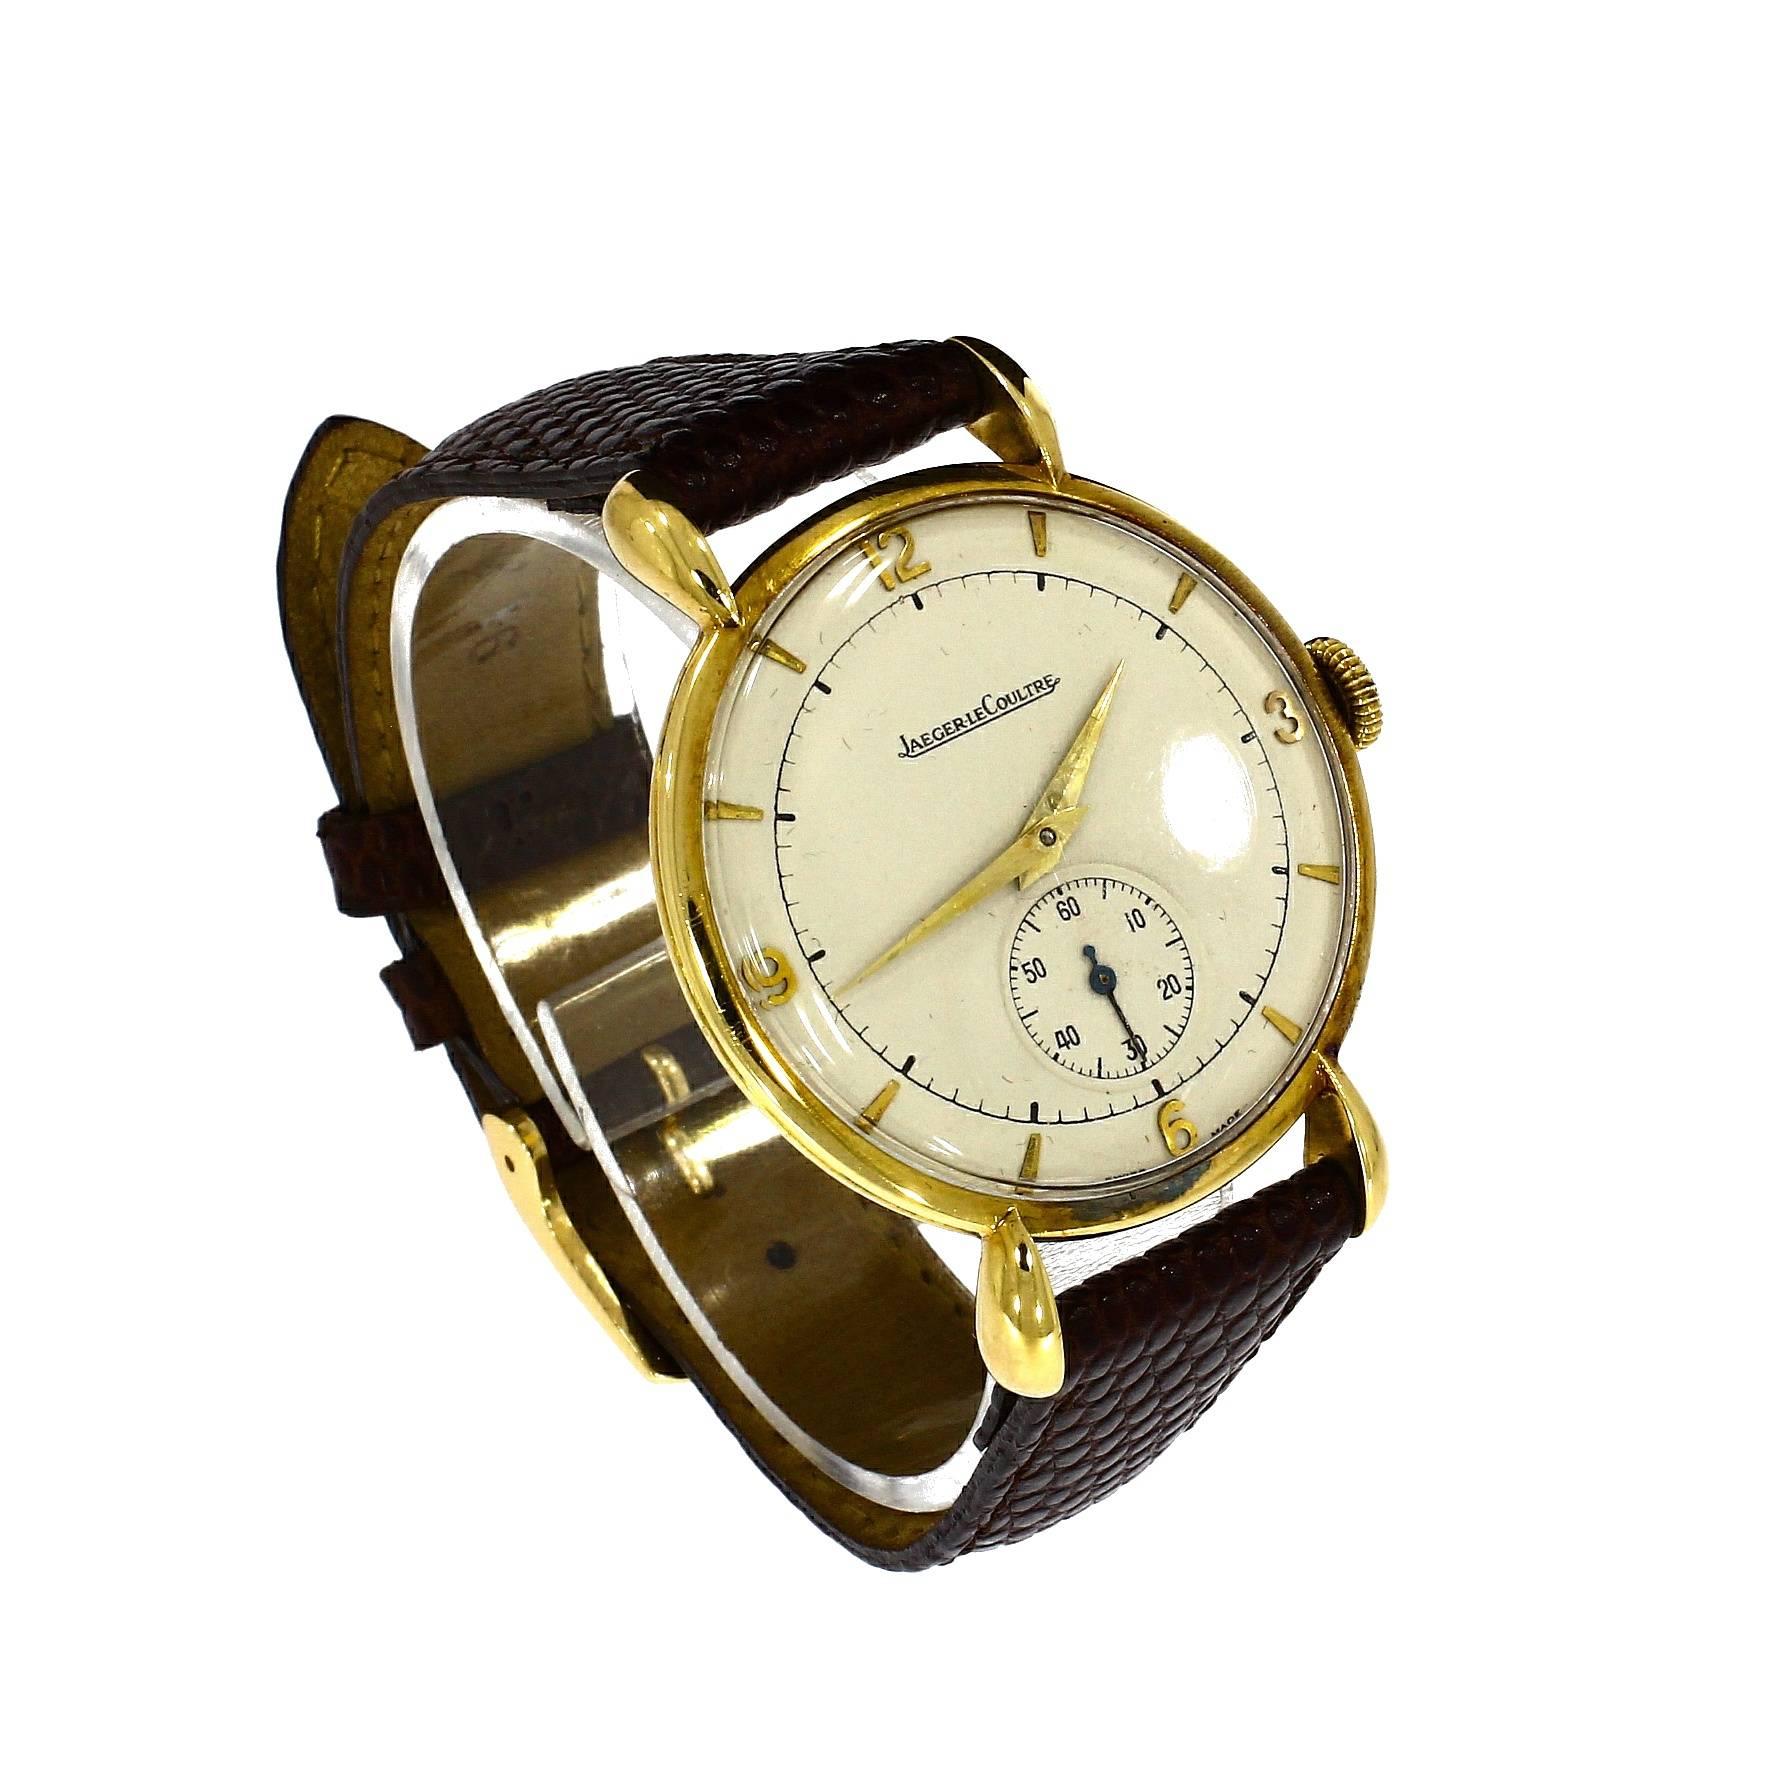 Jaeger LeCoultre Yellow Gold Case 584516 Watch For Sale 4